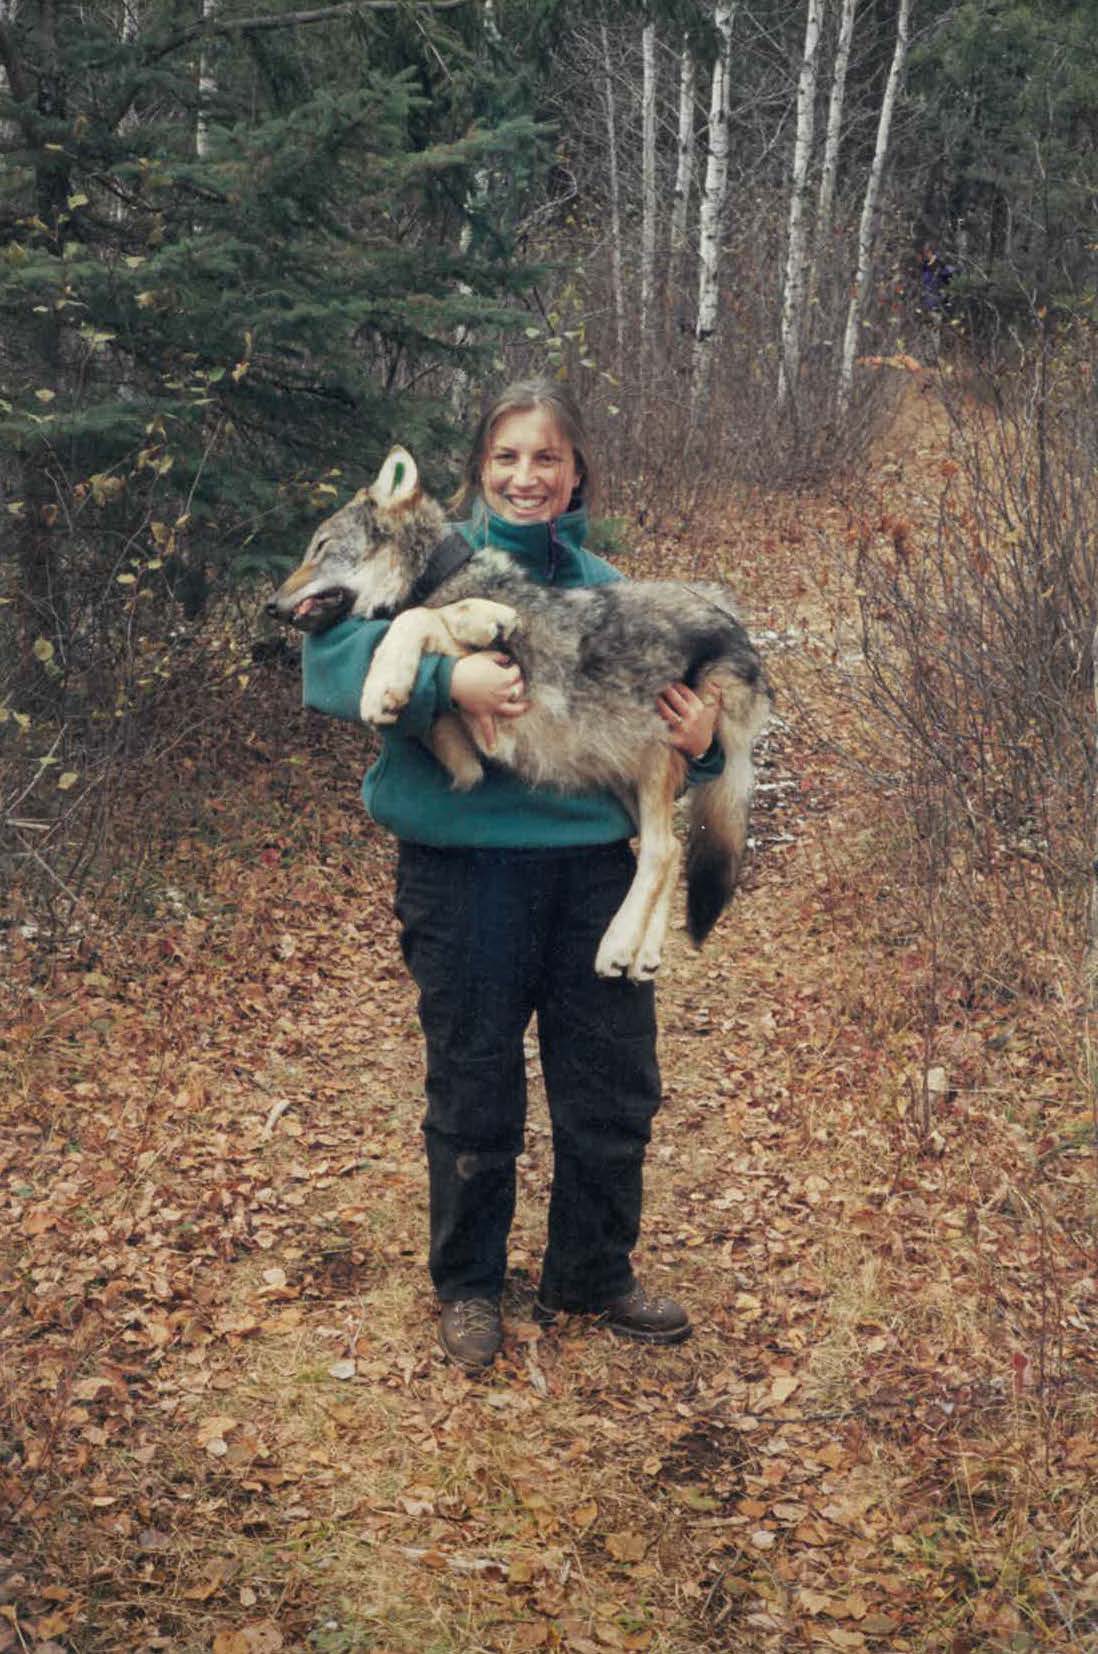 Julianne O'Reilly-Wapstra, a woman in her twenties,  stands in the forest holding a young wolf pup that has been anaesthetised and tagged for tracking in Minnesota.